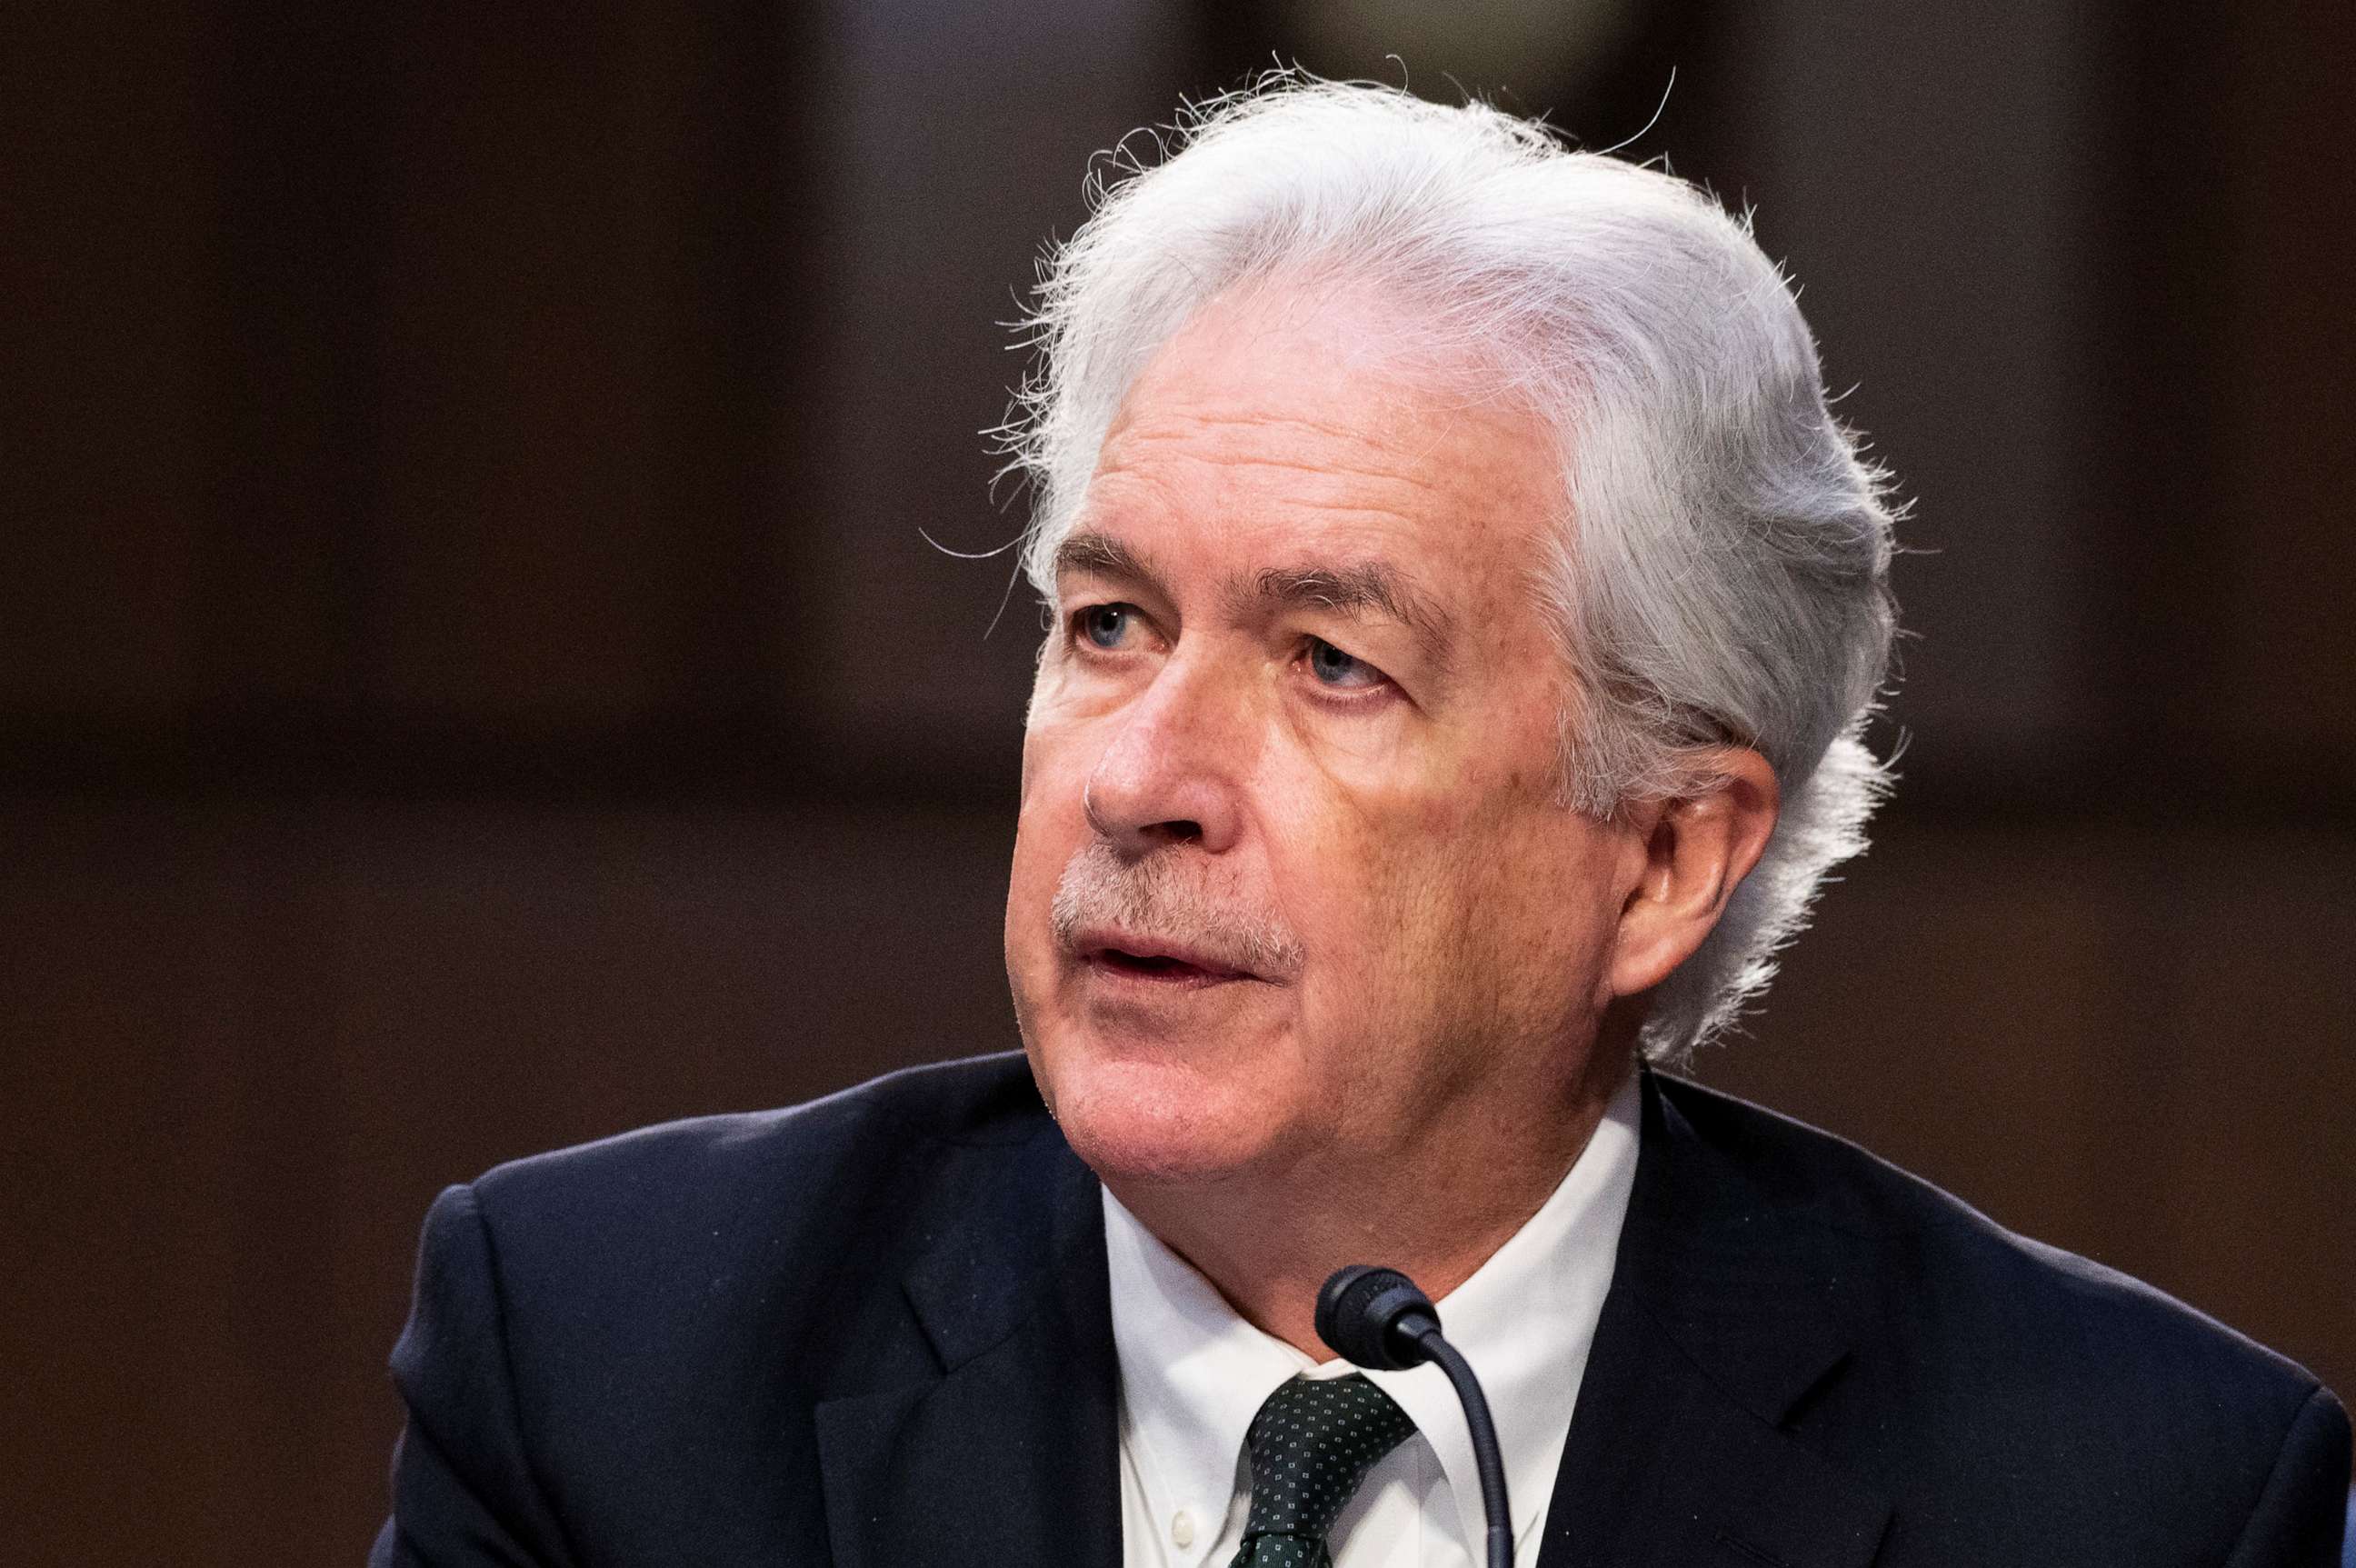 PHOTO: In this May 101, 2022, file photo, CIA Director William Burns testifies during the Senate Select Intelligence Committee hearing on "Worldwide Threats," on Capitol Hill in Washington, D.C.